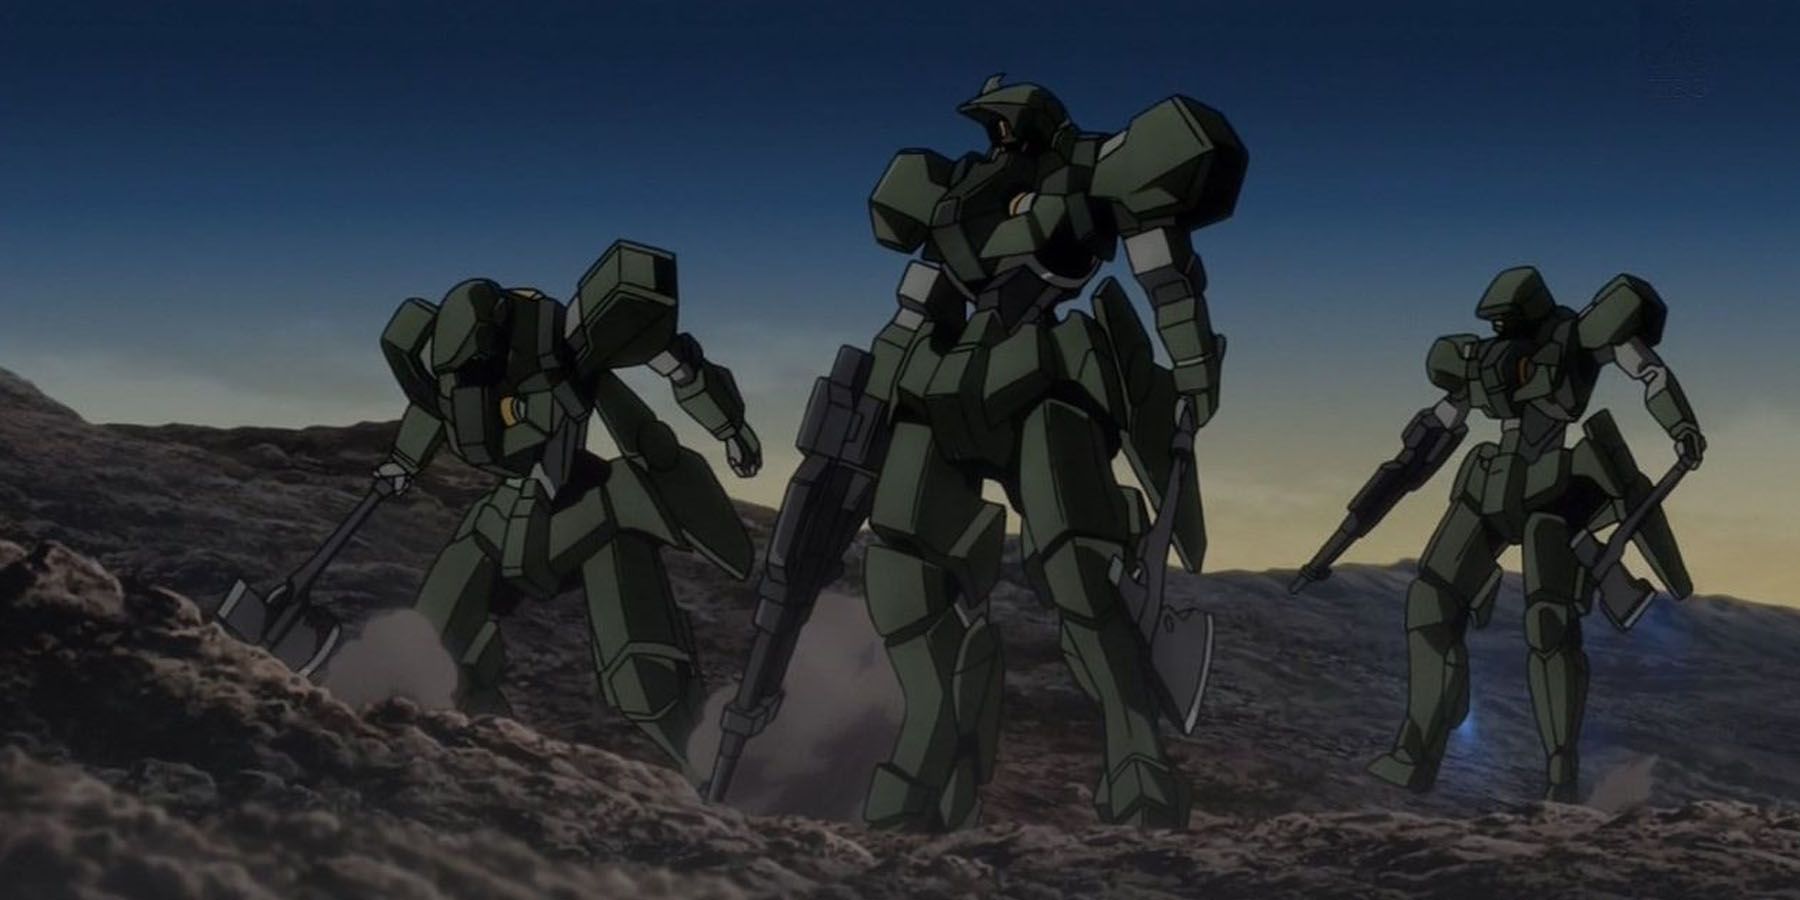 Mobile Suits prepared for war